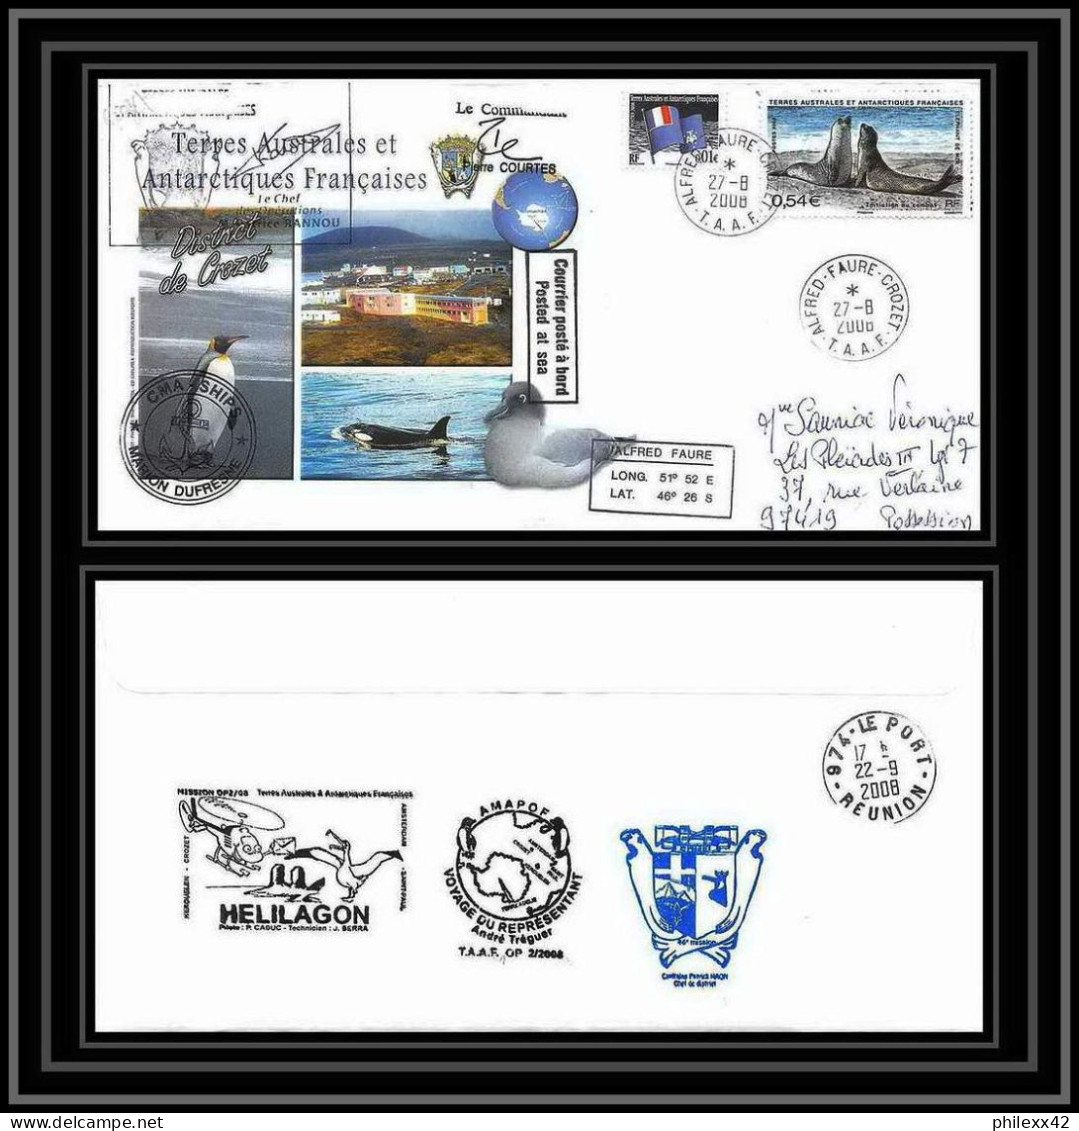 2824 Sea Elephant Terres Australes TAAF Helilagon Lettre Cover Dufresne Signé Signed Op 2008/2 CROZET N°512 27/8/2008 - Helicópteros